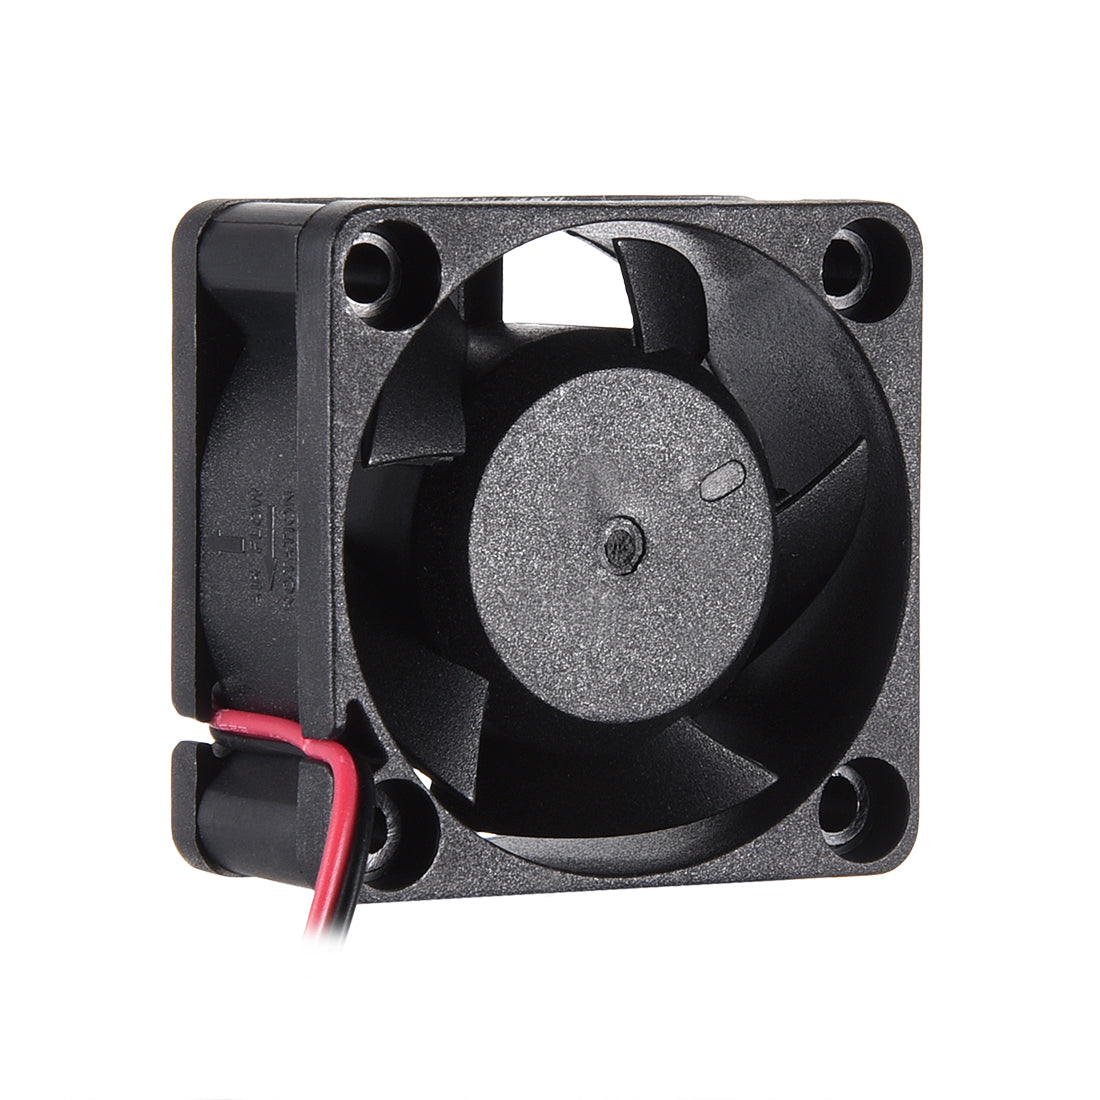 uxcell Uxcell SNOWFAN Authorized 40mm x 40mm x 20mm 12V Brushless DC Cooling Fan #0353